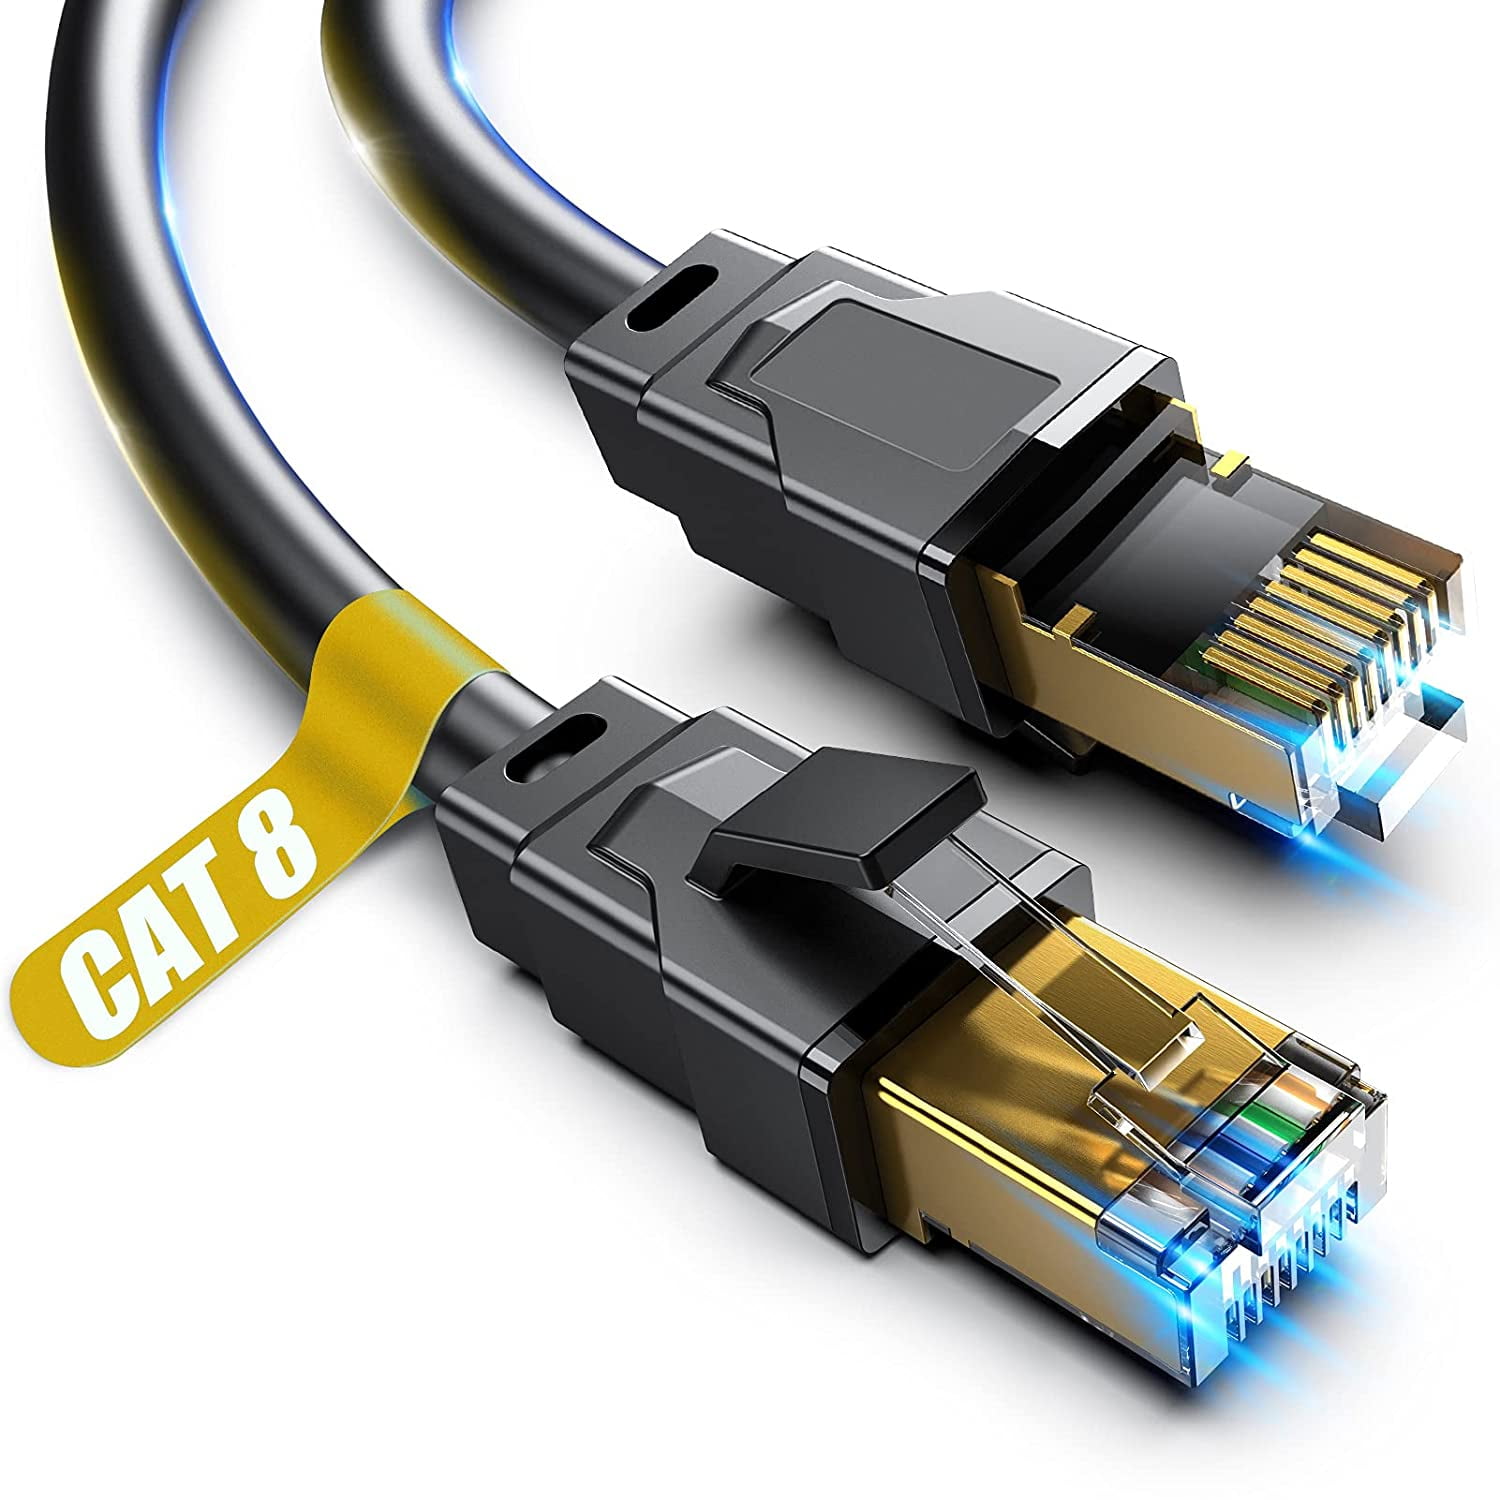 US Heavy Duty High Speed Cat8 LAN Network RJ45 Ethernet Cable - 6 10 25 50  66ft